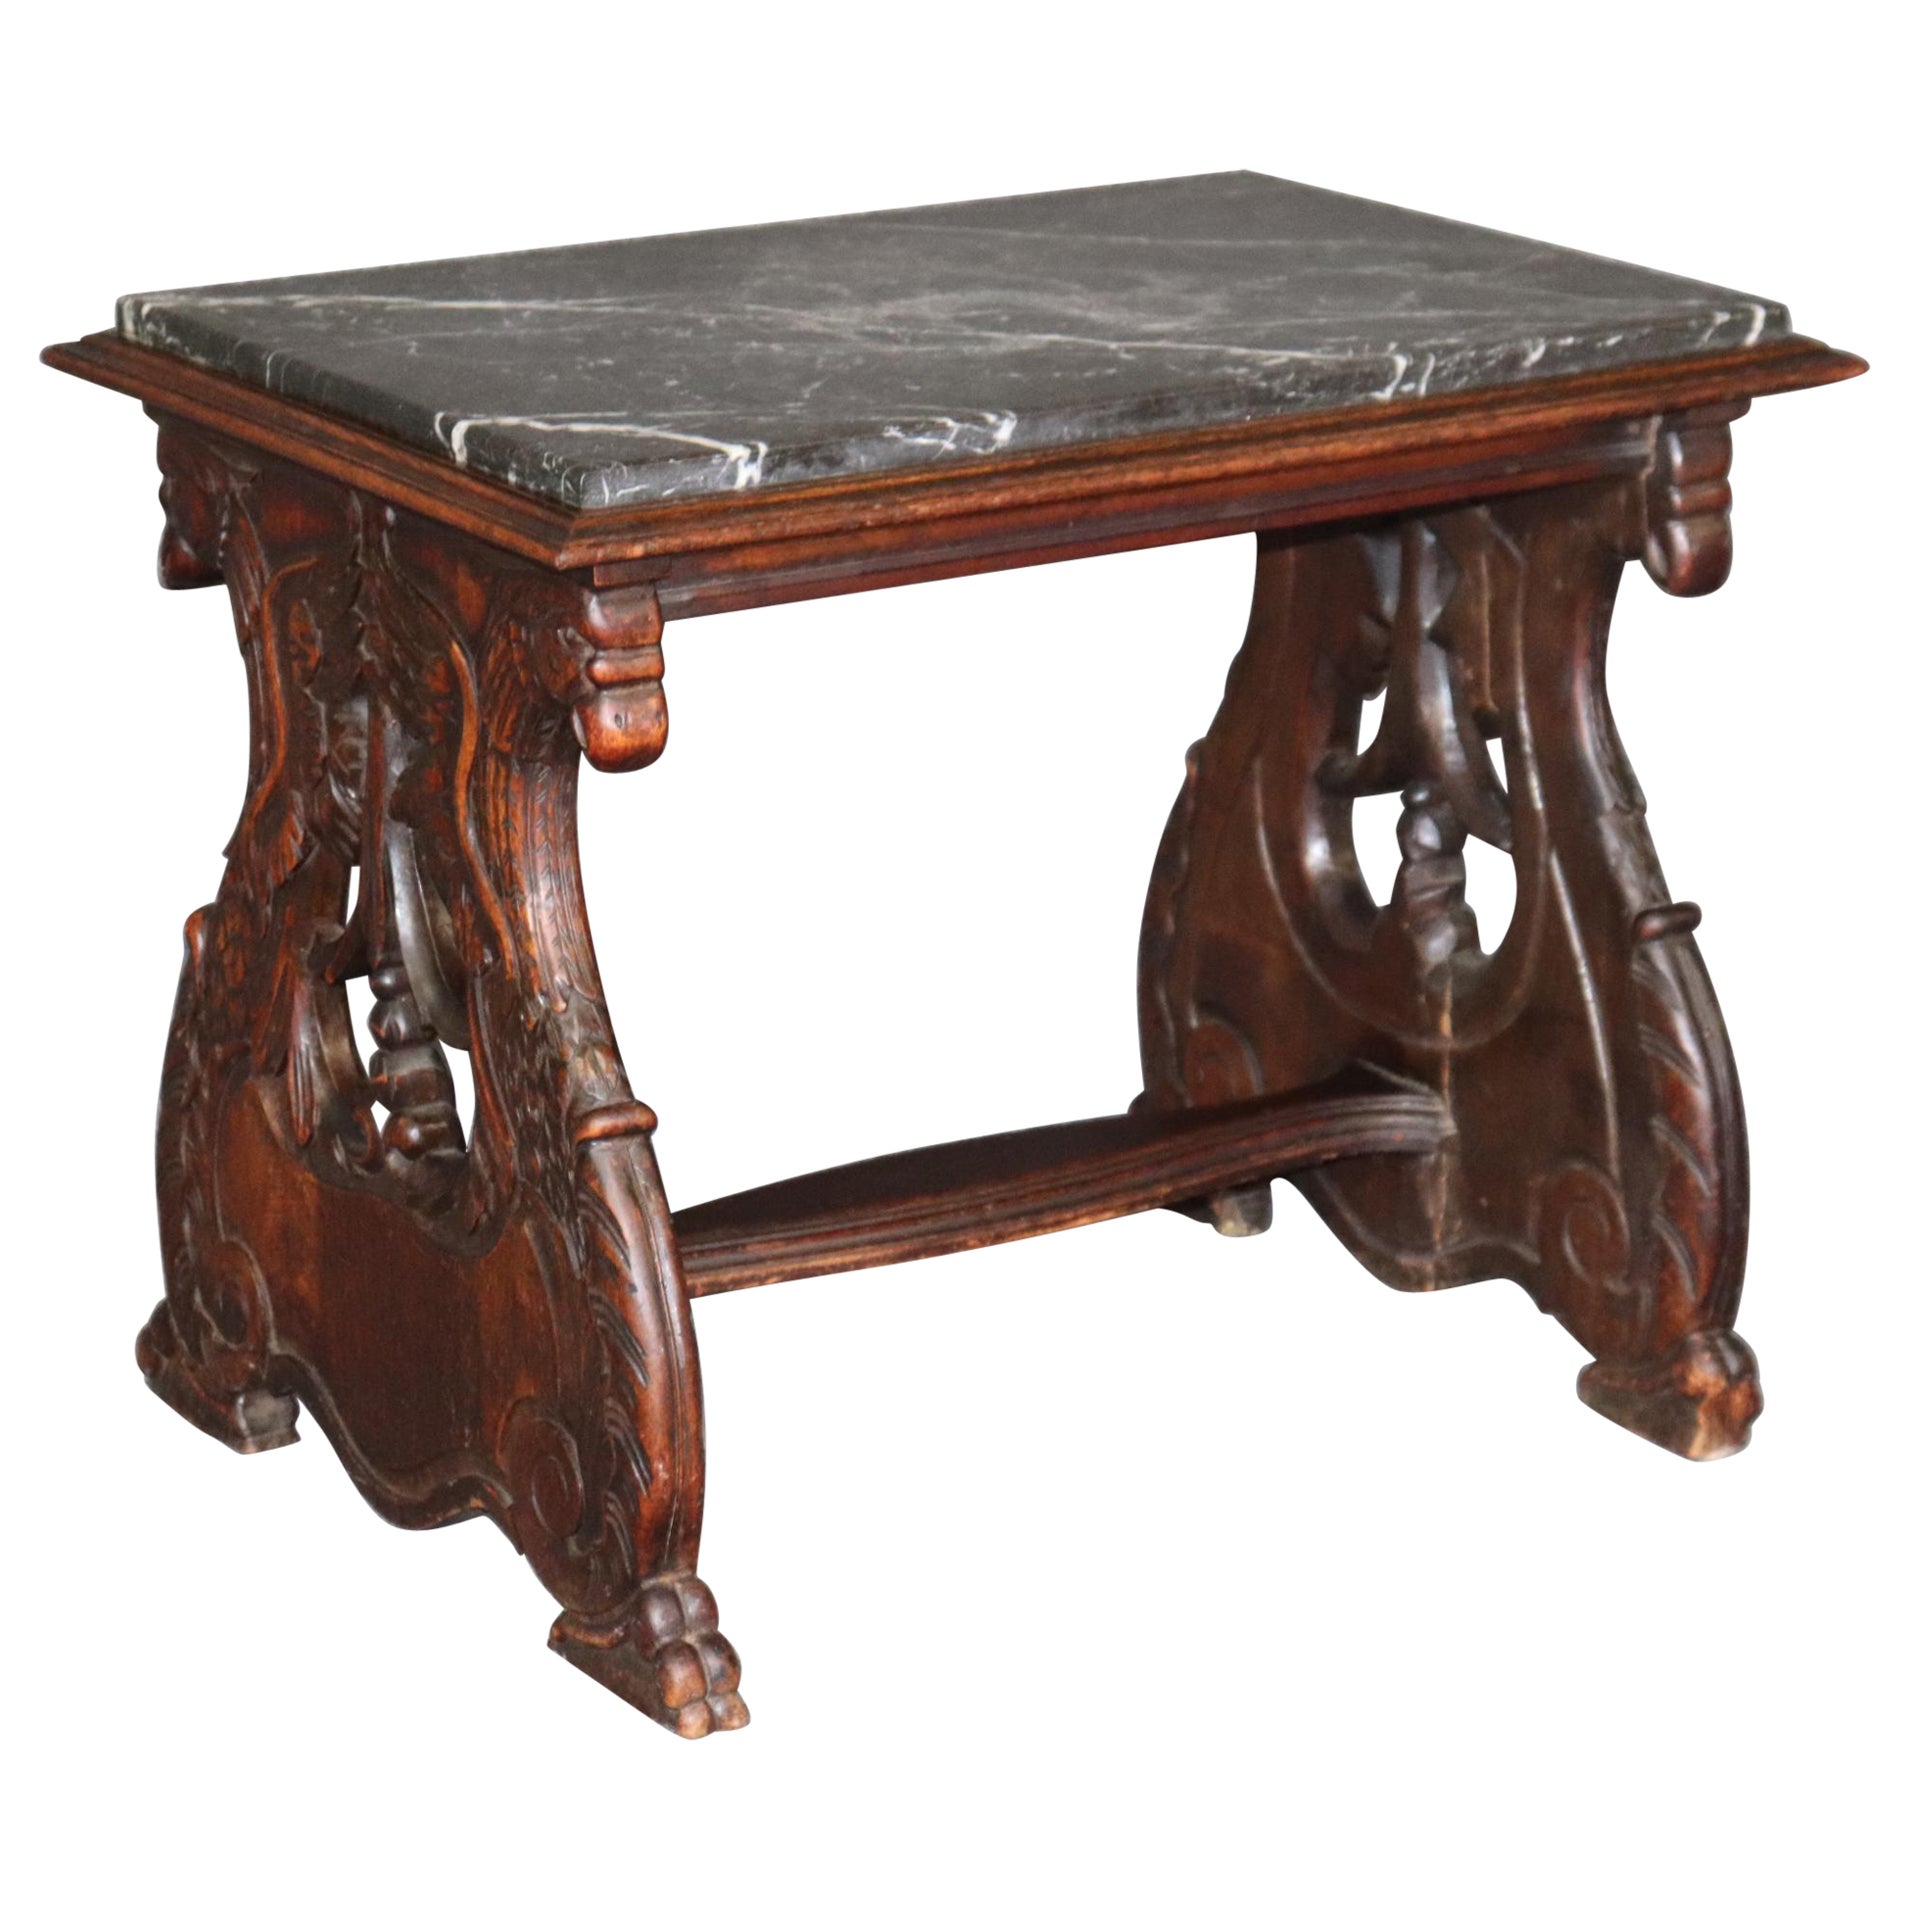 Belgian Antique 19th Century Marble Top Carved Accent Table, Coffee Table